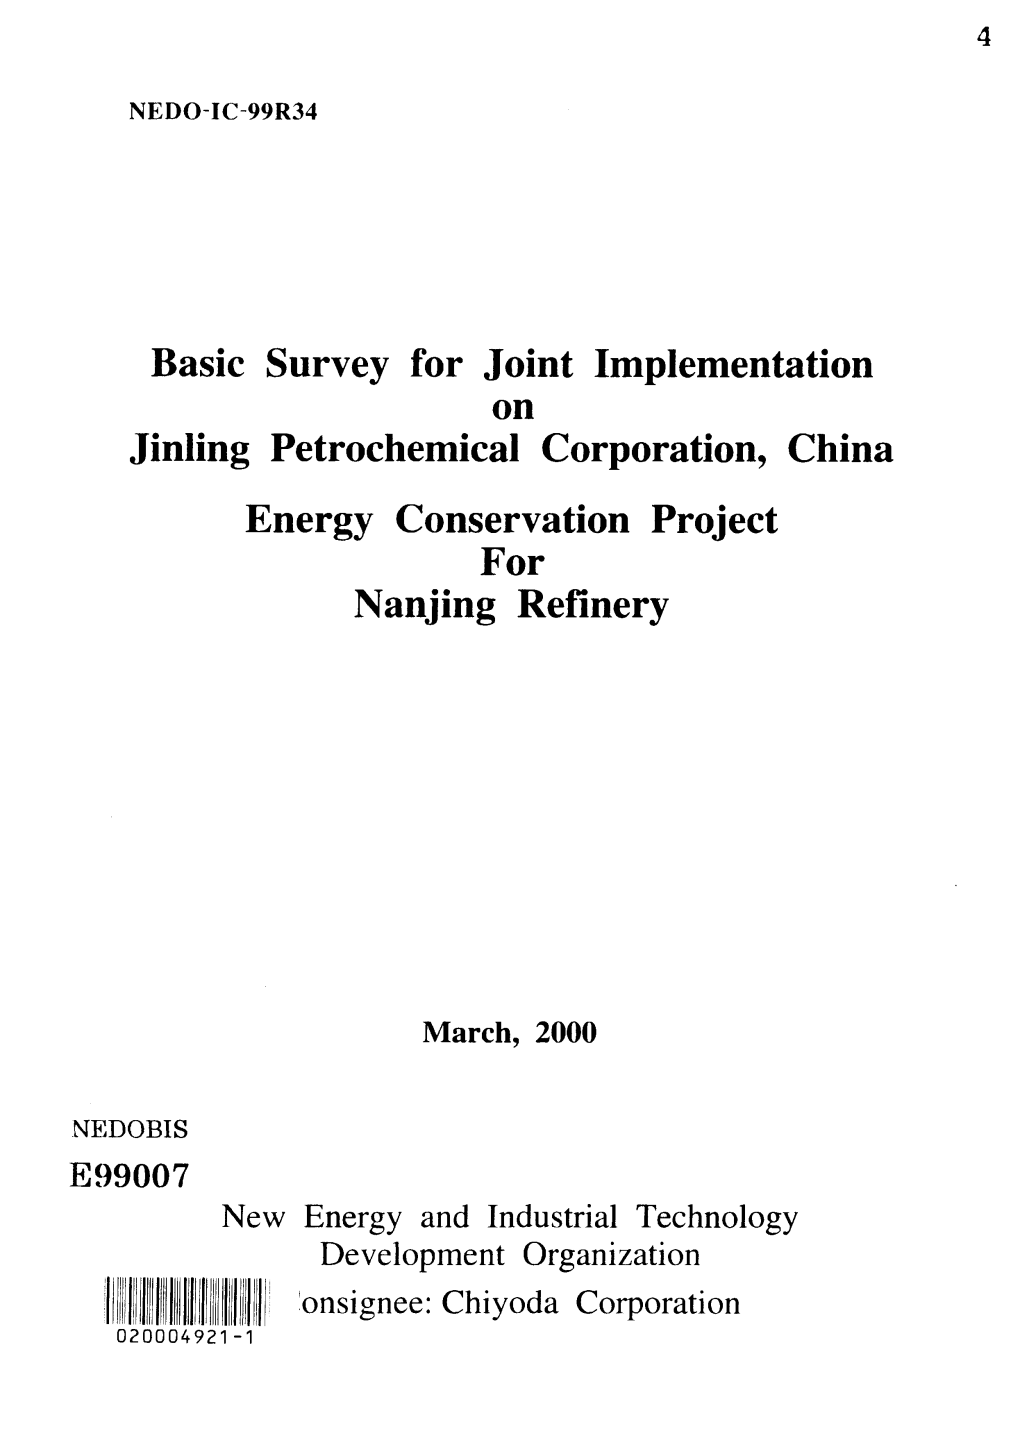 Basic Survey for Joint Implementation on Jinling Petrochemical Corporation, China Energy Conservation Project for Nanjing Refinery